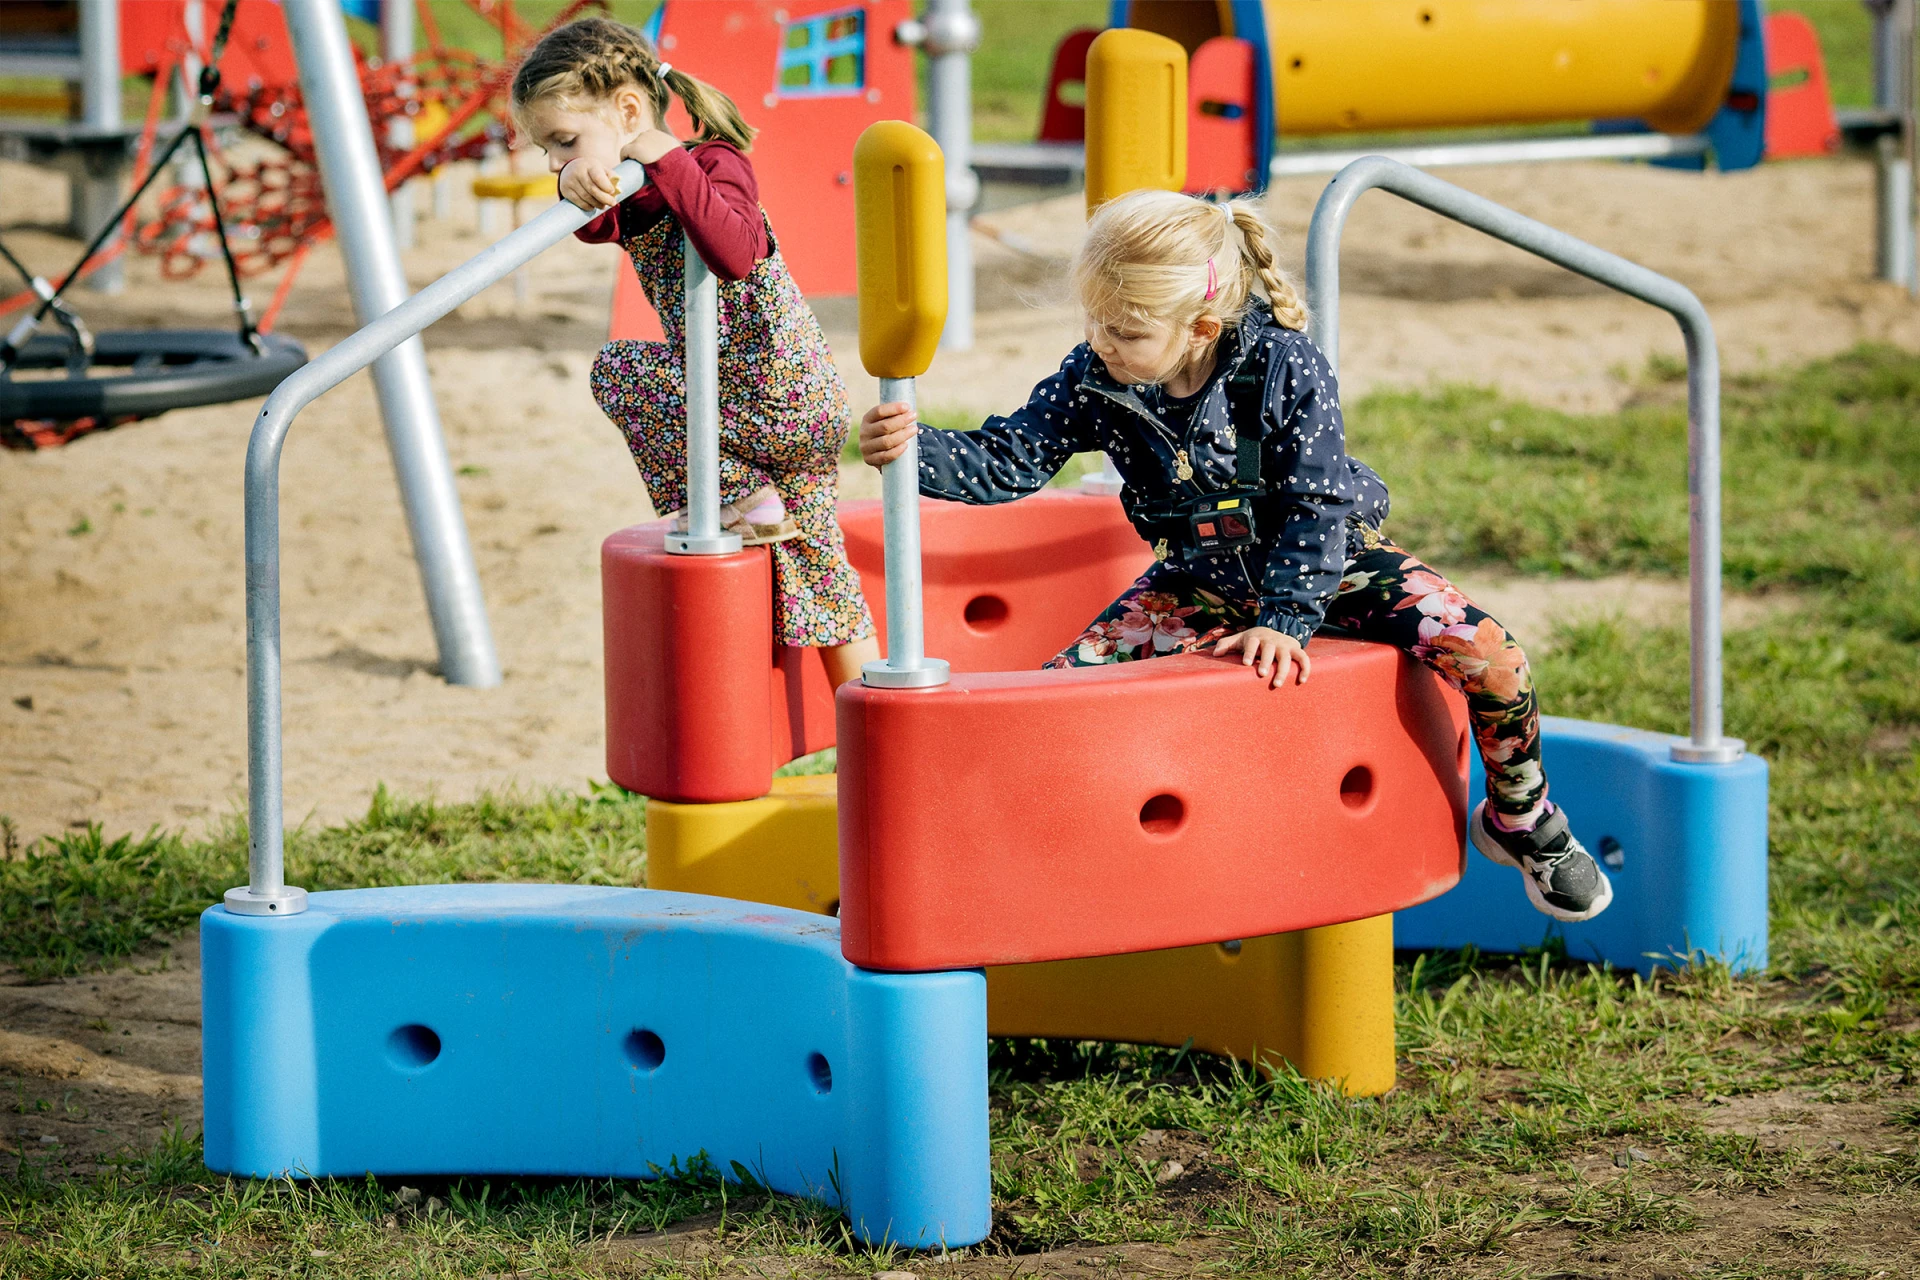 two girl climbing on playground equipment in a park